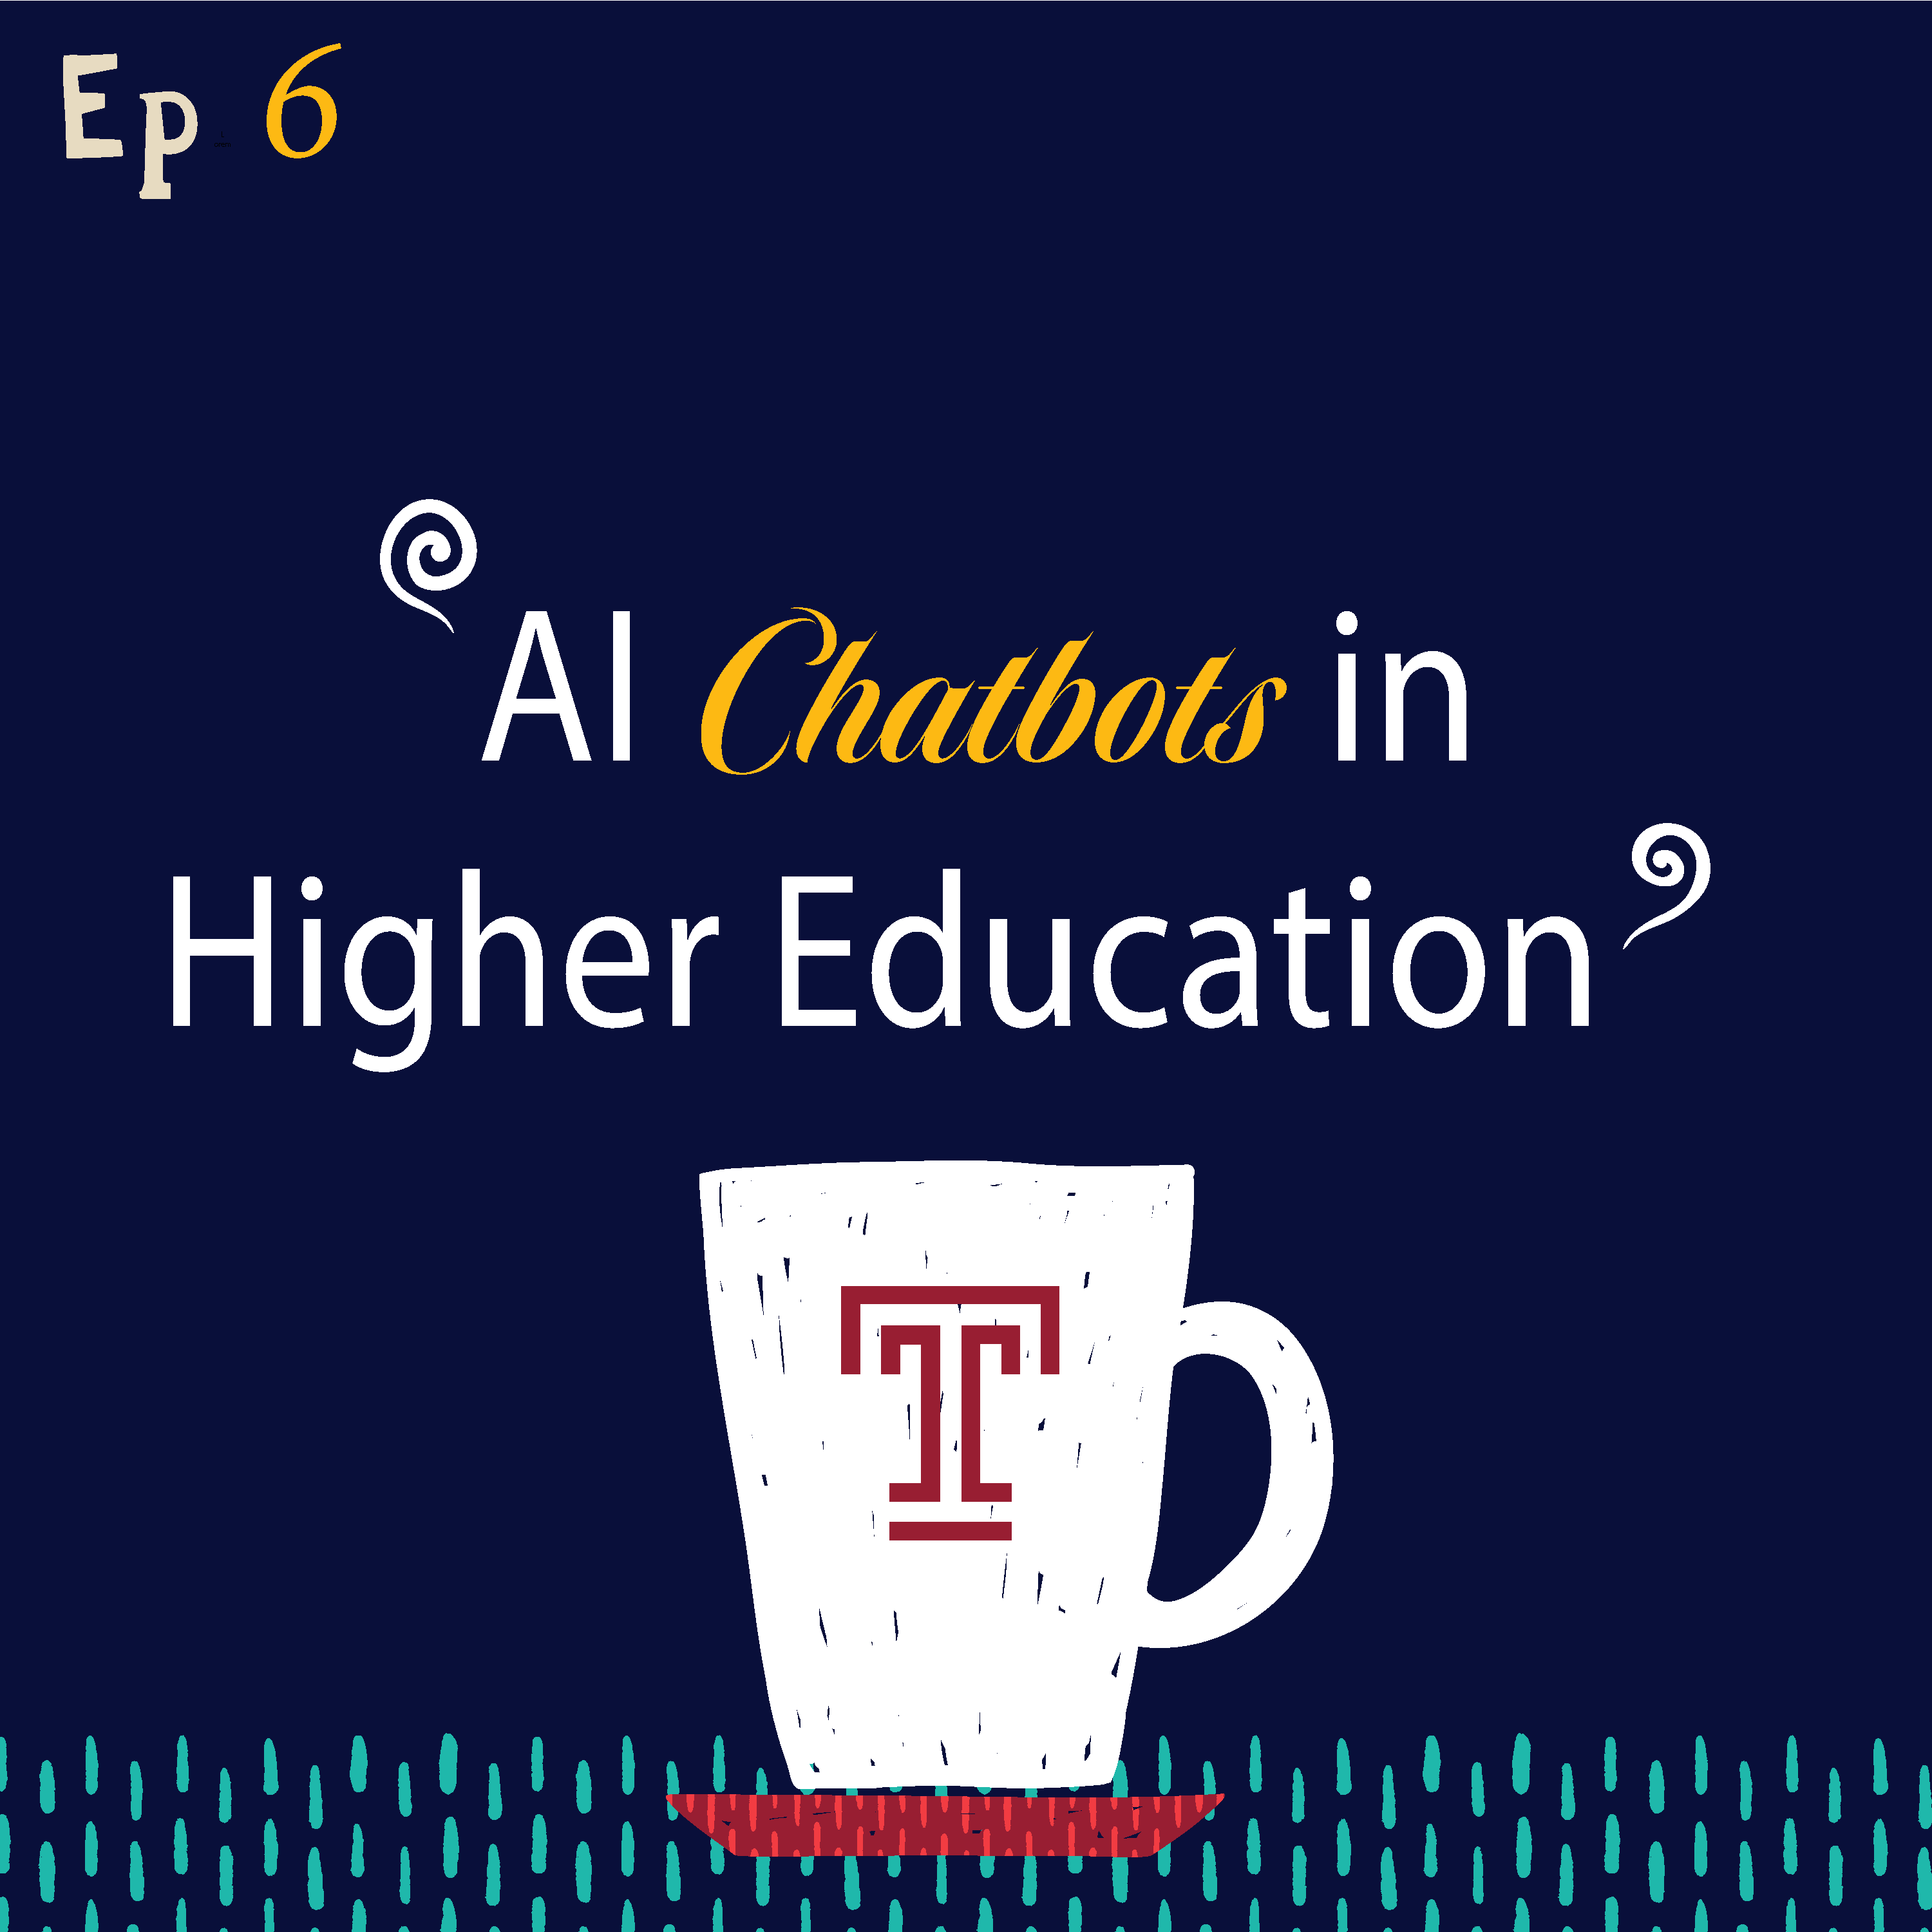 AI Chatbots in Higher Education